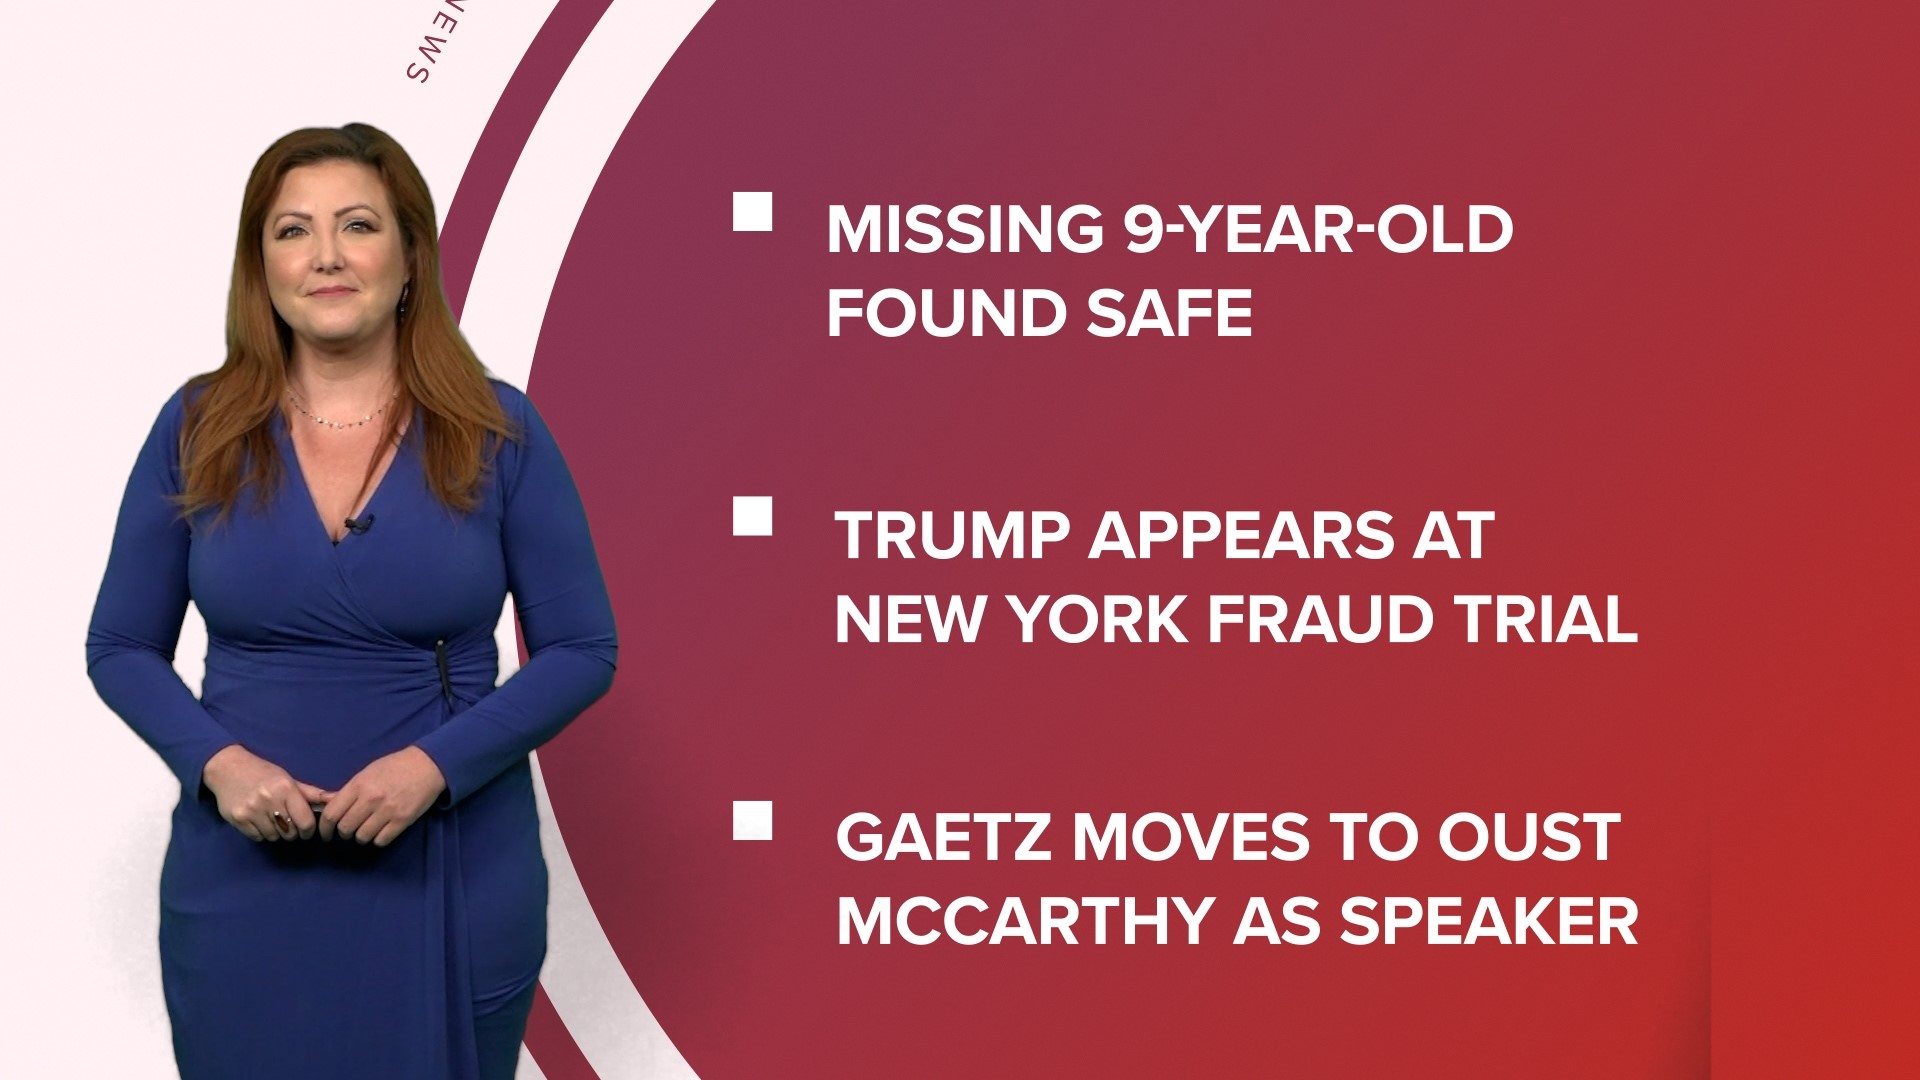 A look at what is happening in the news from Trump's fraud trial underway in New York to a motion filed to oust McCarthy as House Speaker and fat bear week begins.